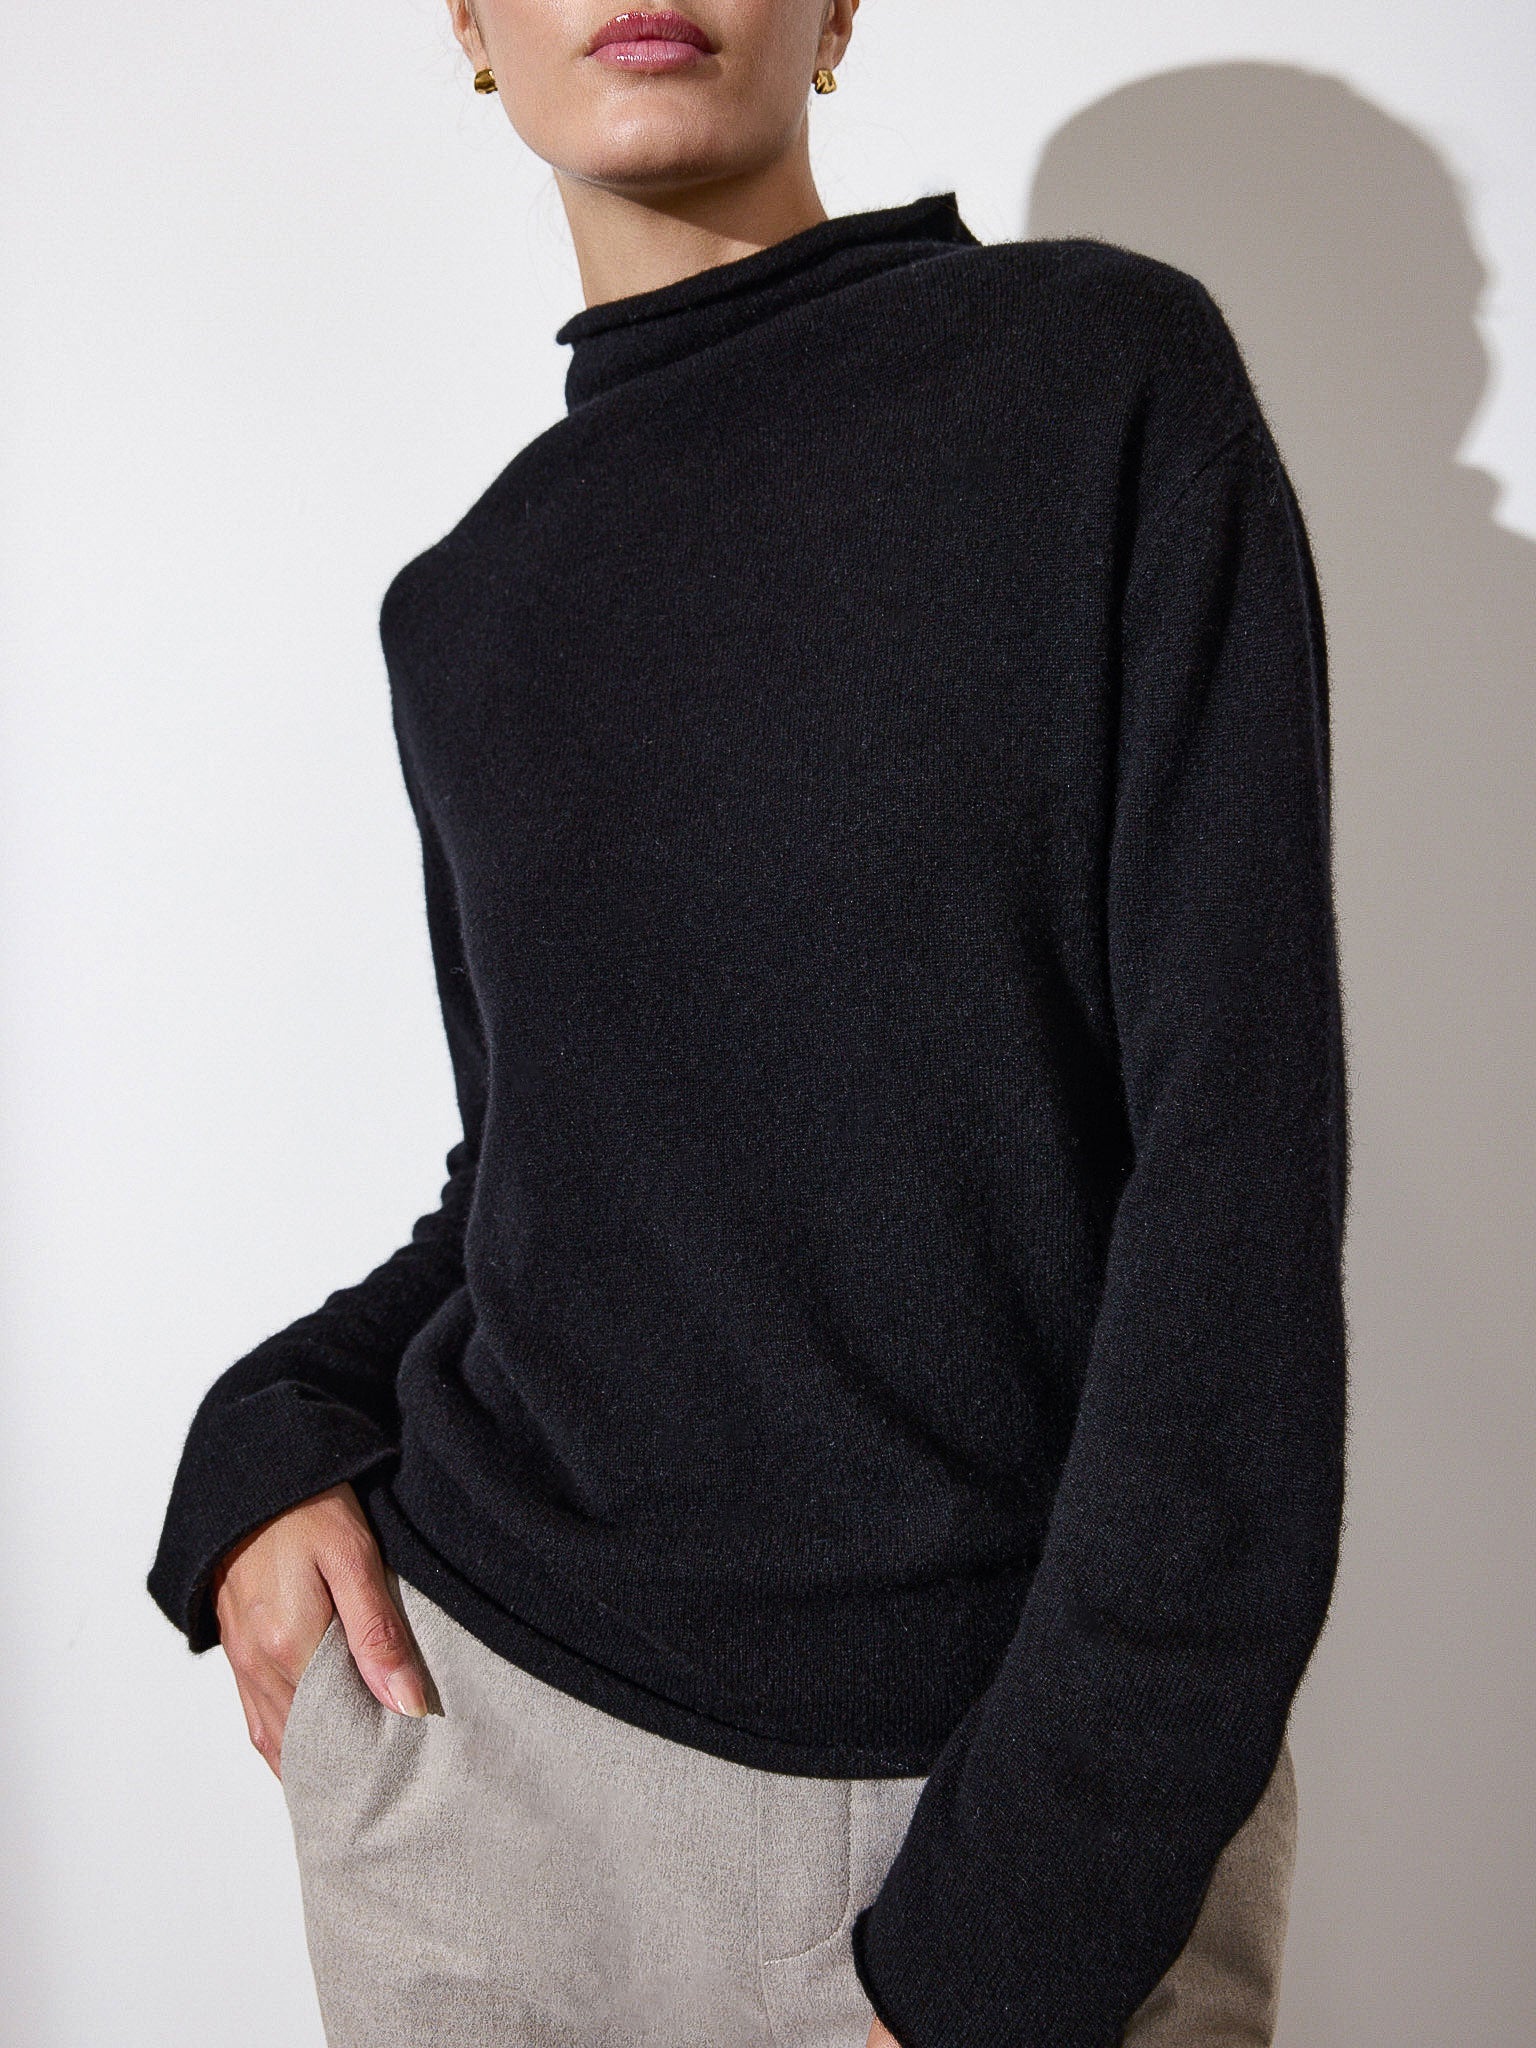 Rhone funnel neck black sweater front view